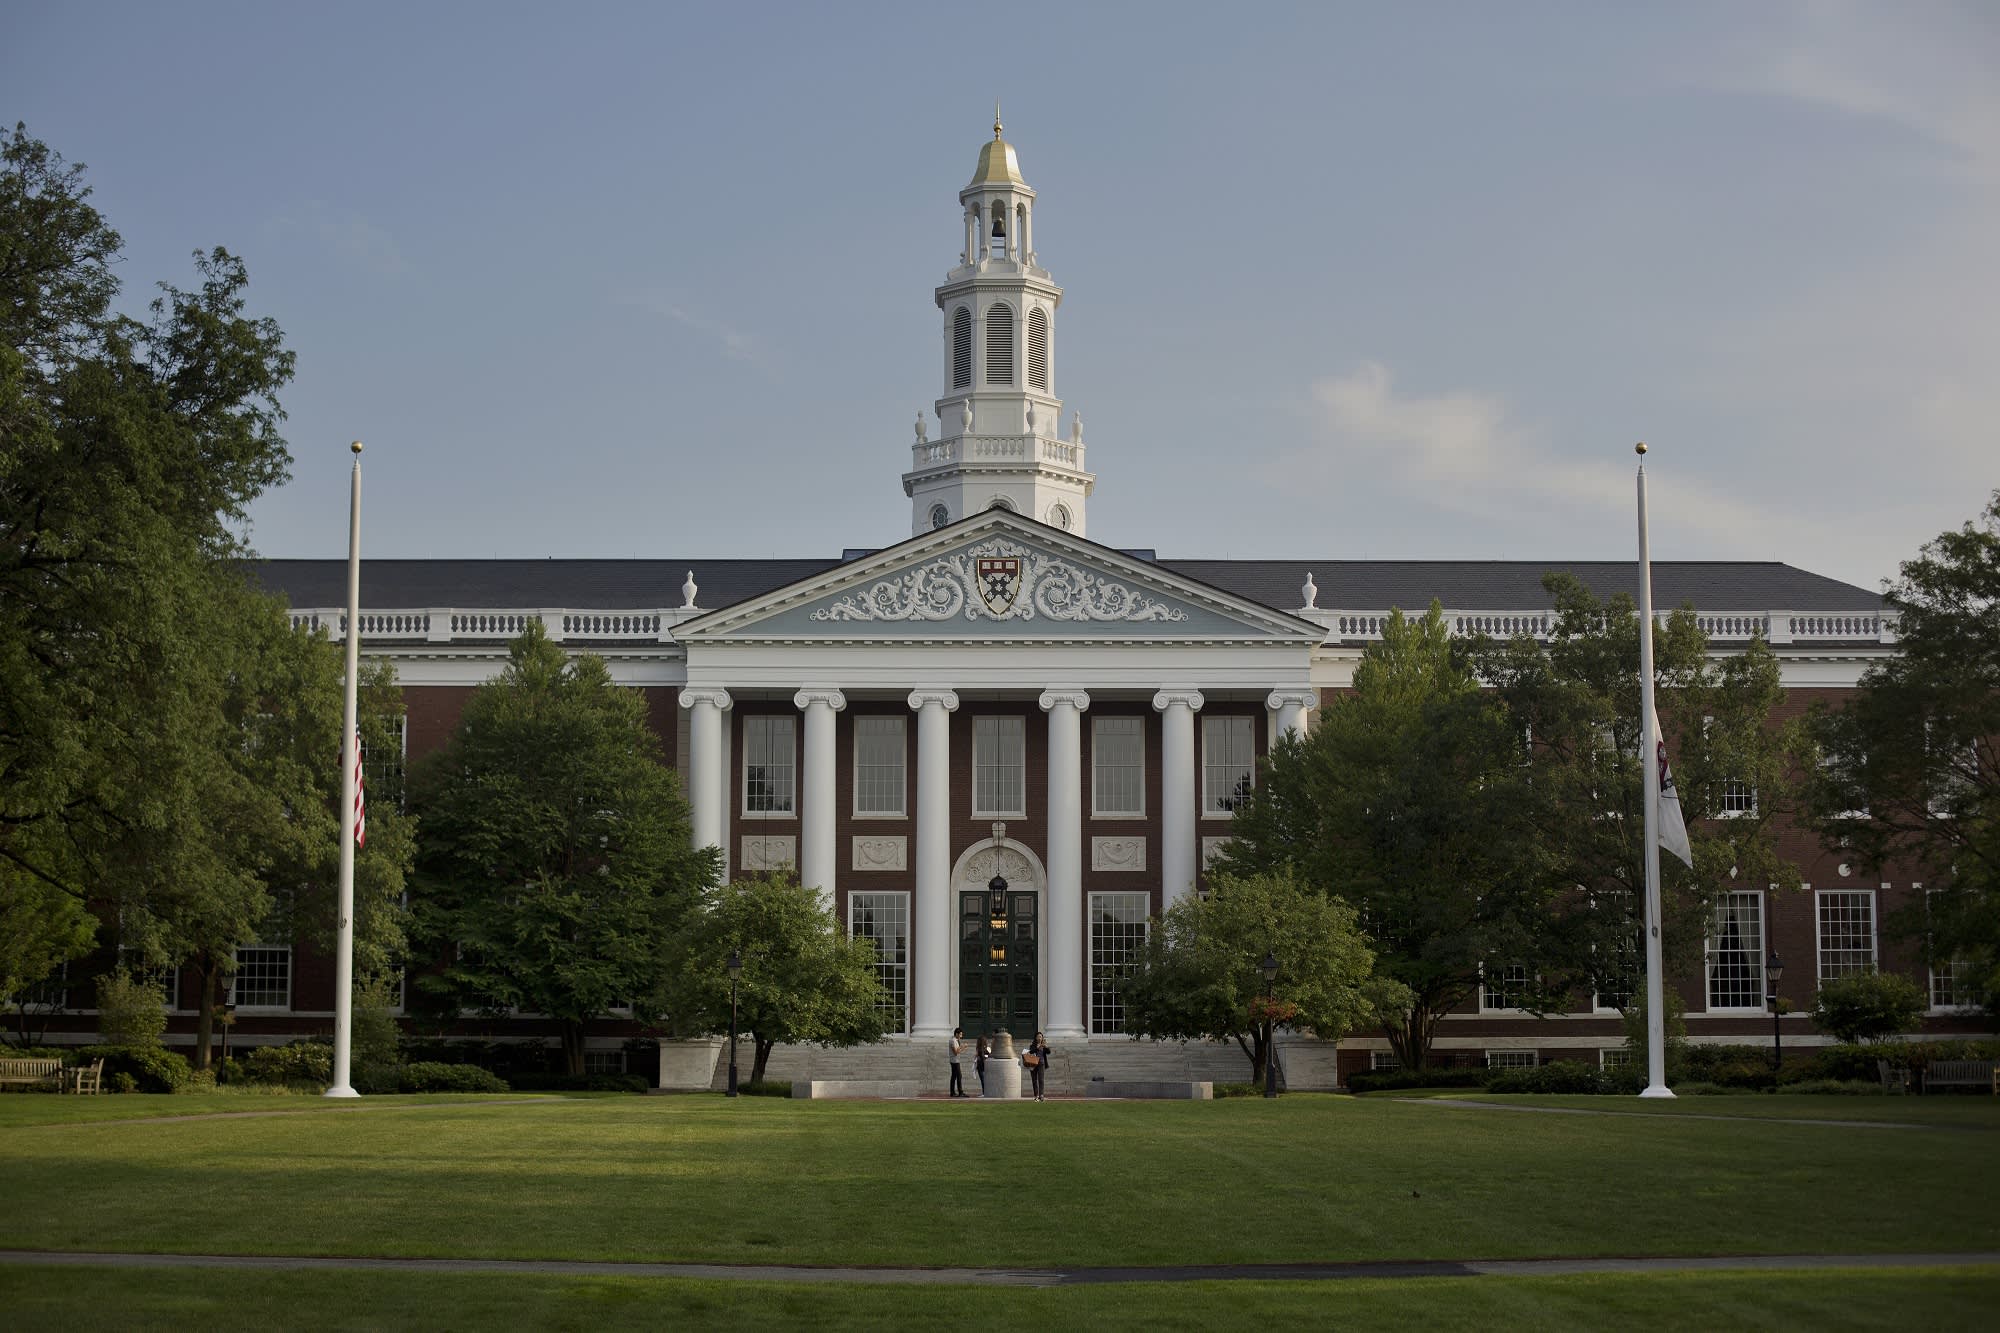 It costs $78,200 to go to Harvard—here's what students actually pay